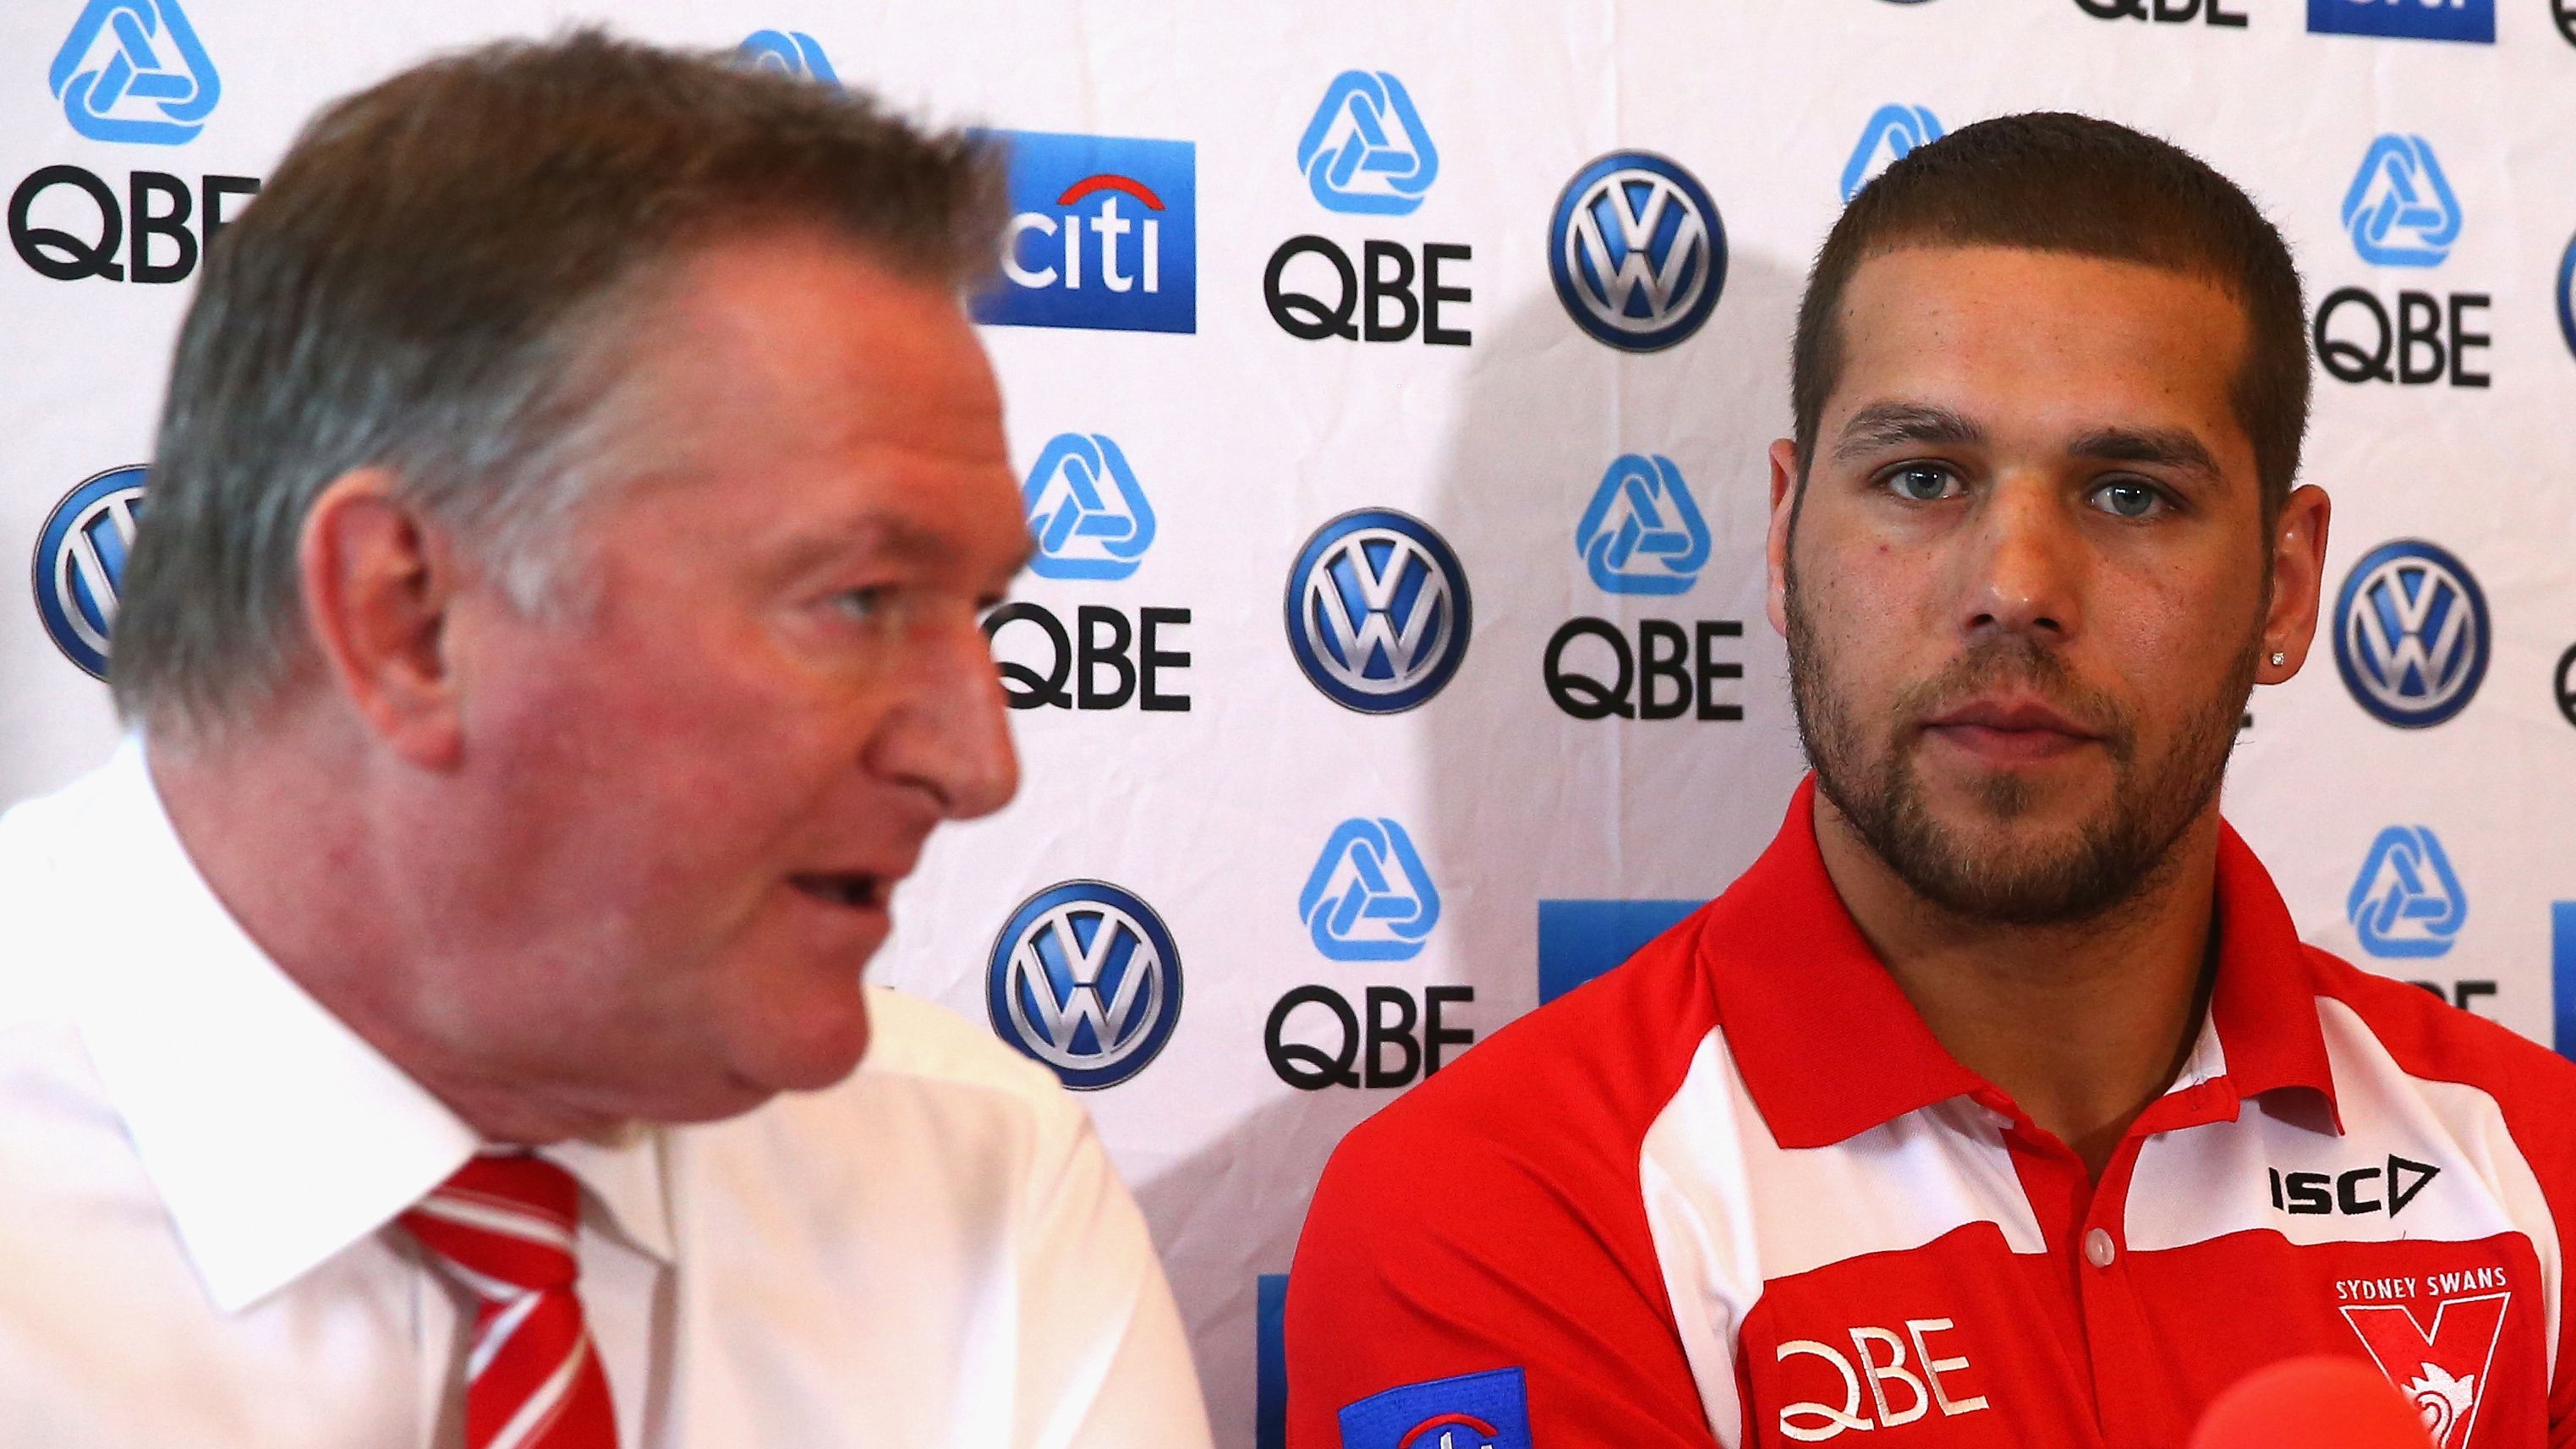 Lance &#x27;Buddy&#x27; Franklin speaks to the media during a Sydney Swans AFL press conference at Sydney Cricket Ground on October 9, 2013 in Sydney, Australia. Franklin has signed a nine year deal to play for Sydney beginning next season.